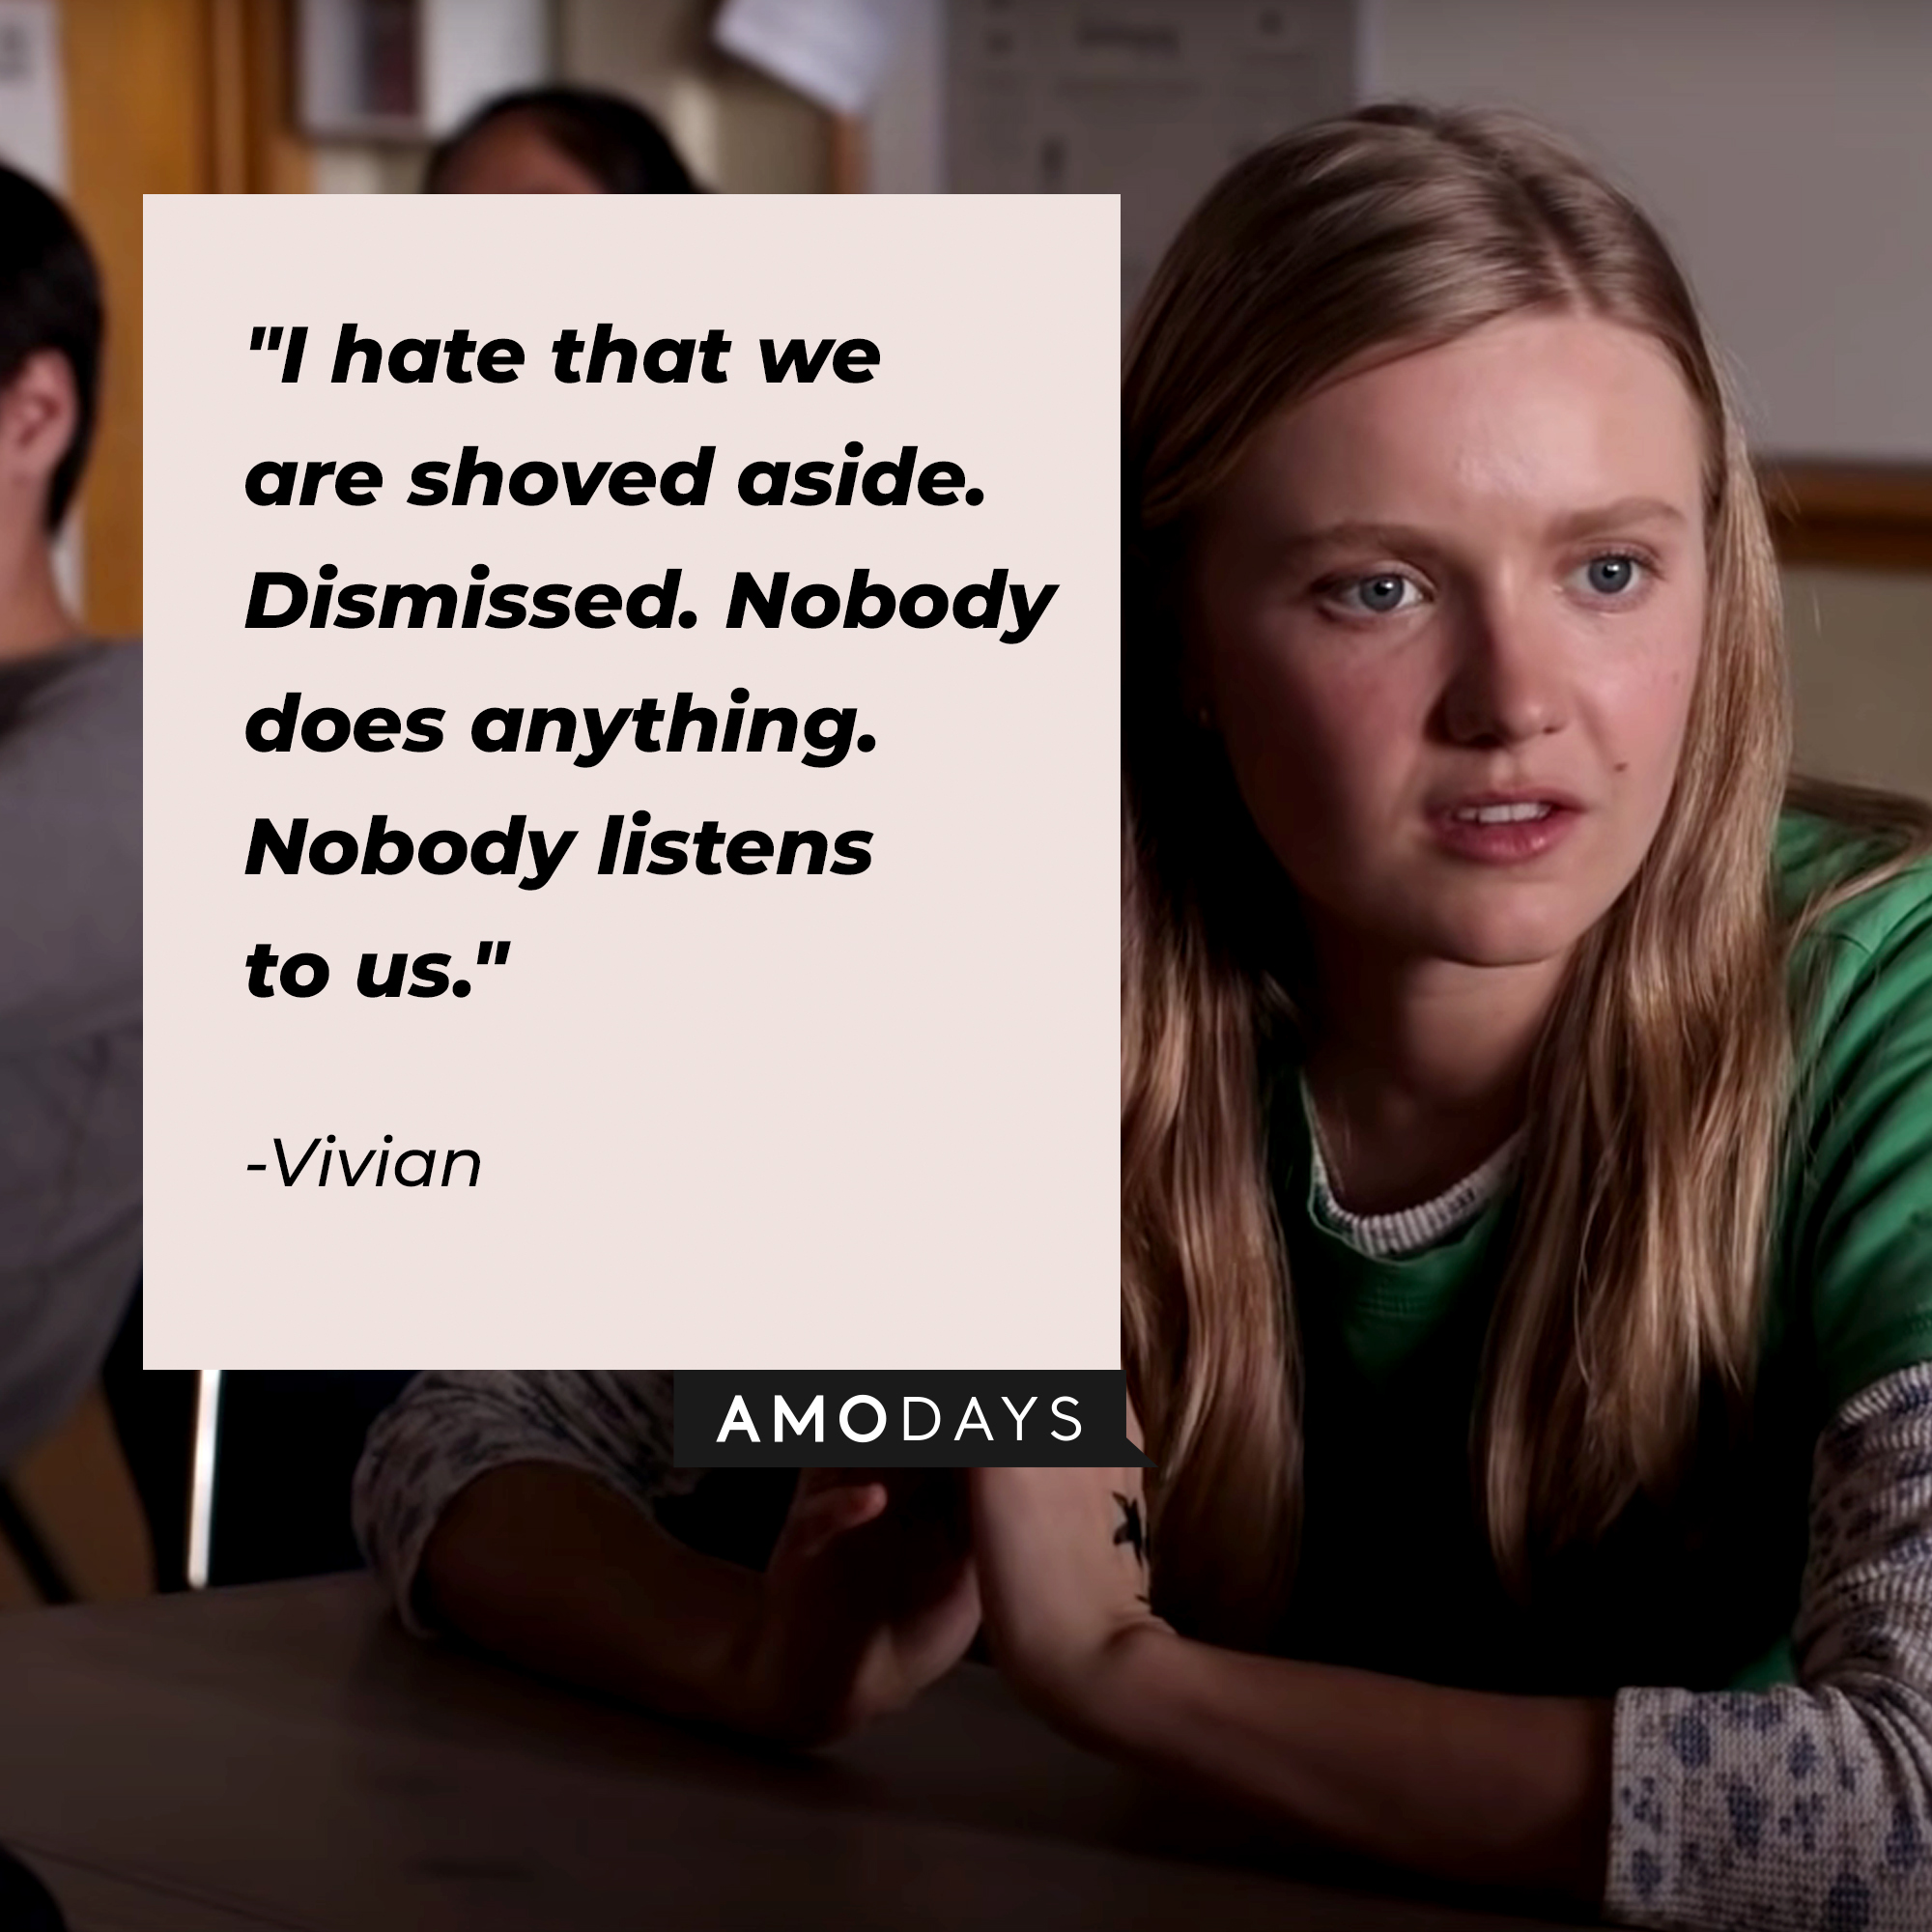 Vivian’s quote: “I hate that we are shoved aside. Dismissed. Nobody does anything. Nobody listens to us.”| Image: Youtube.com/Netflix